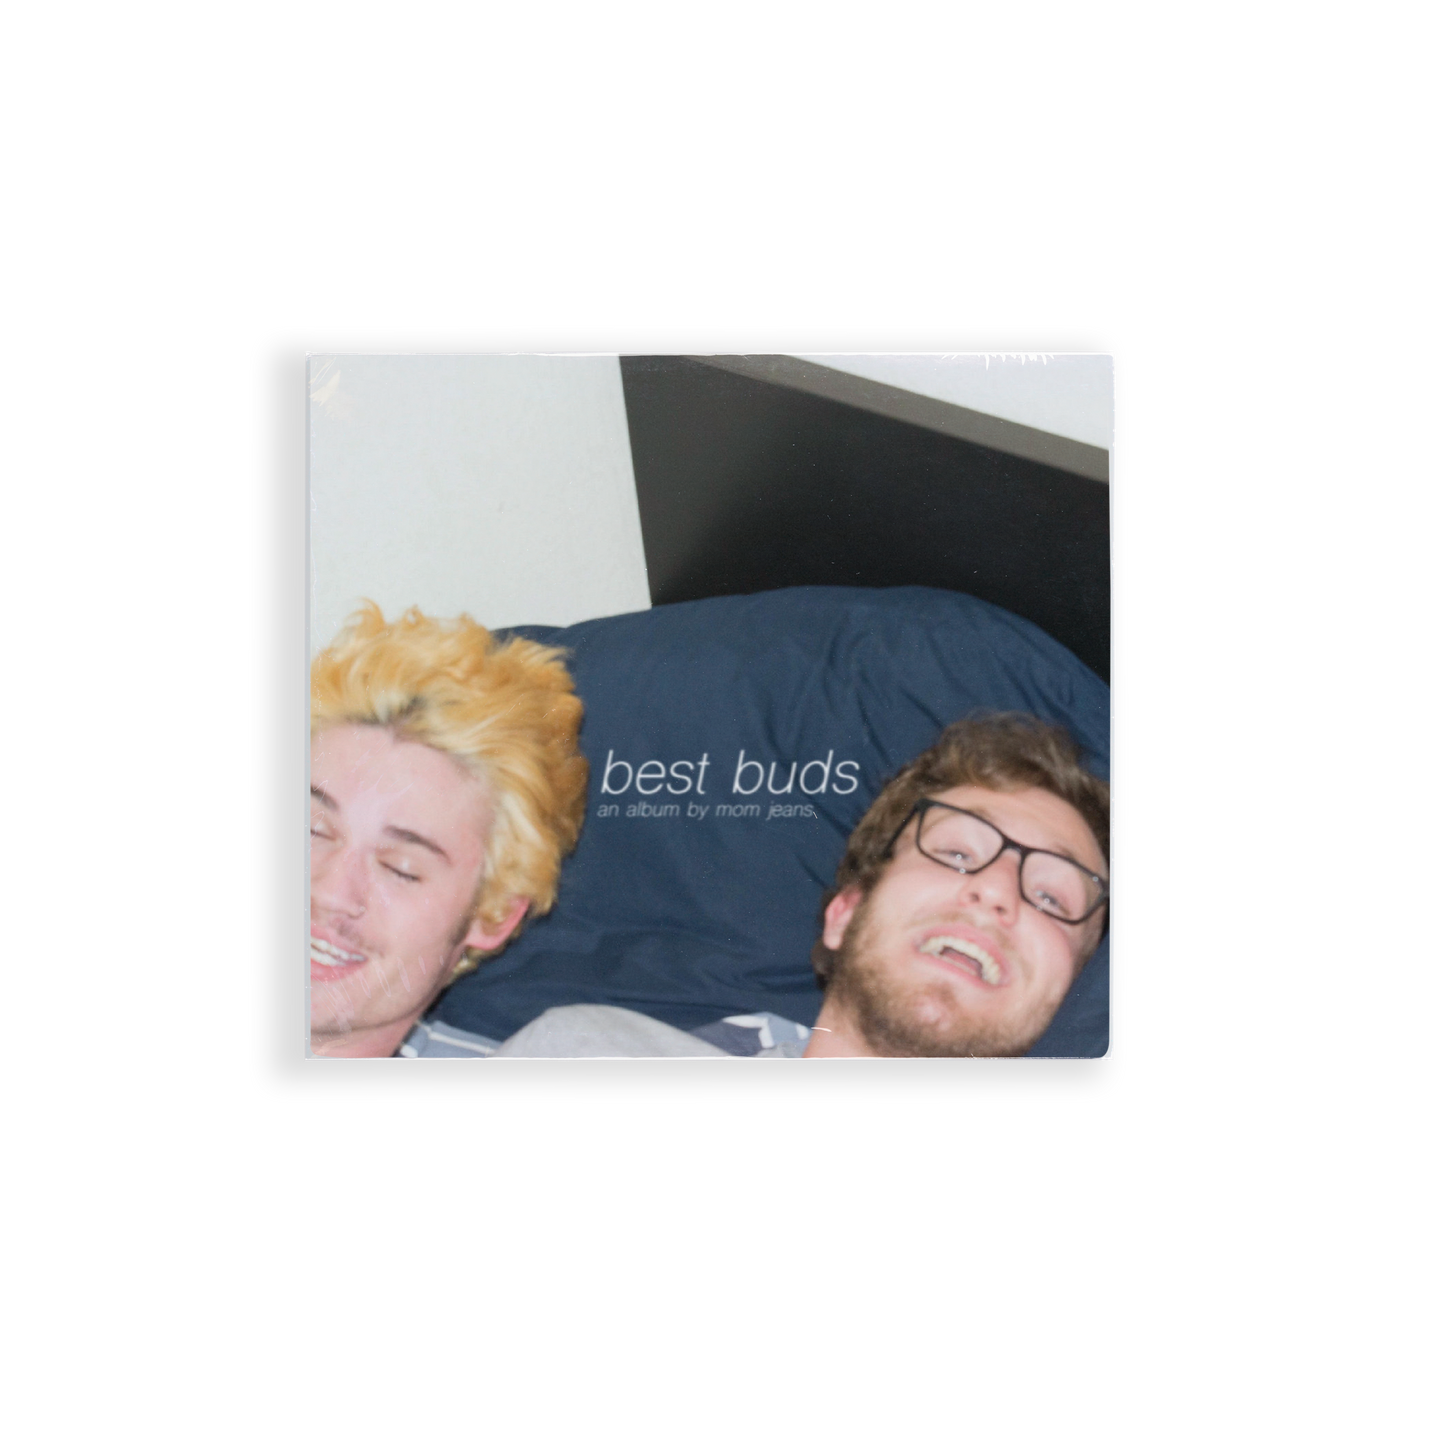 Mom Jeans "Best Buds" CD